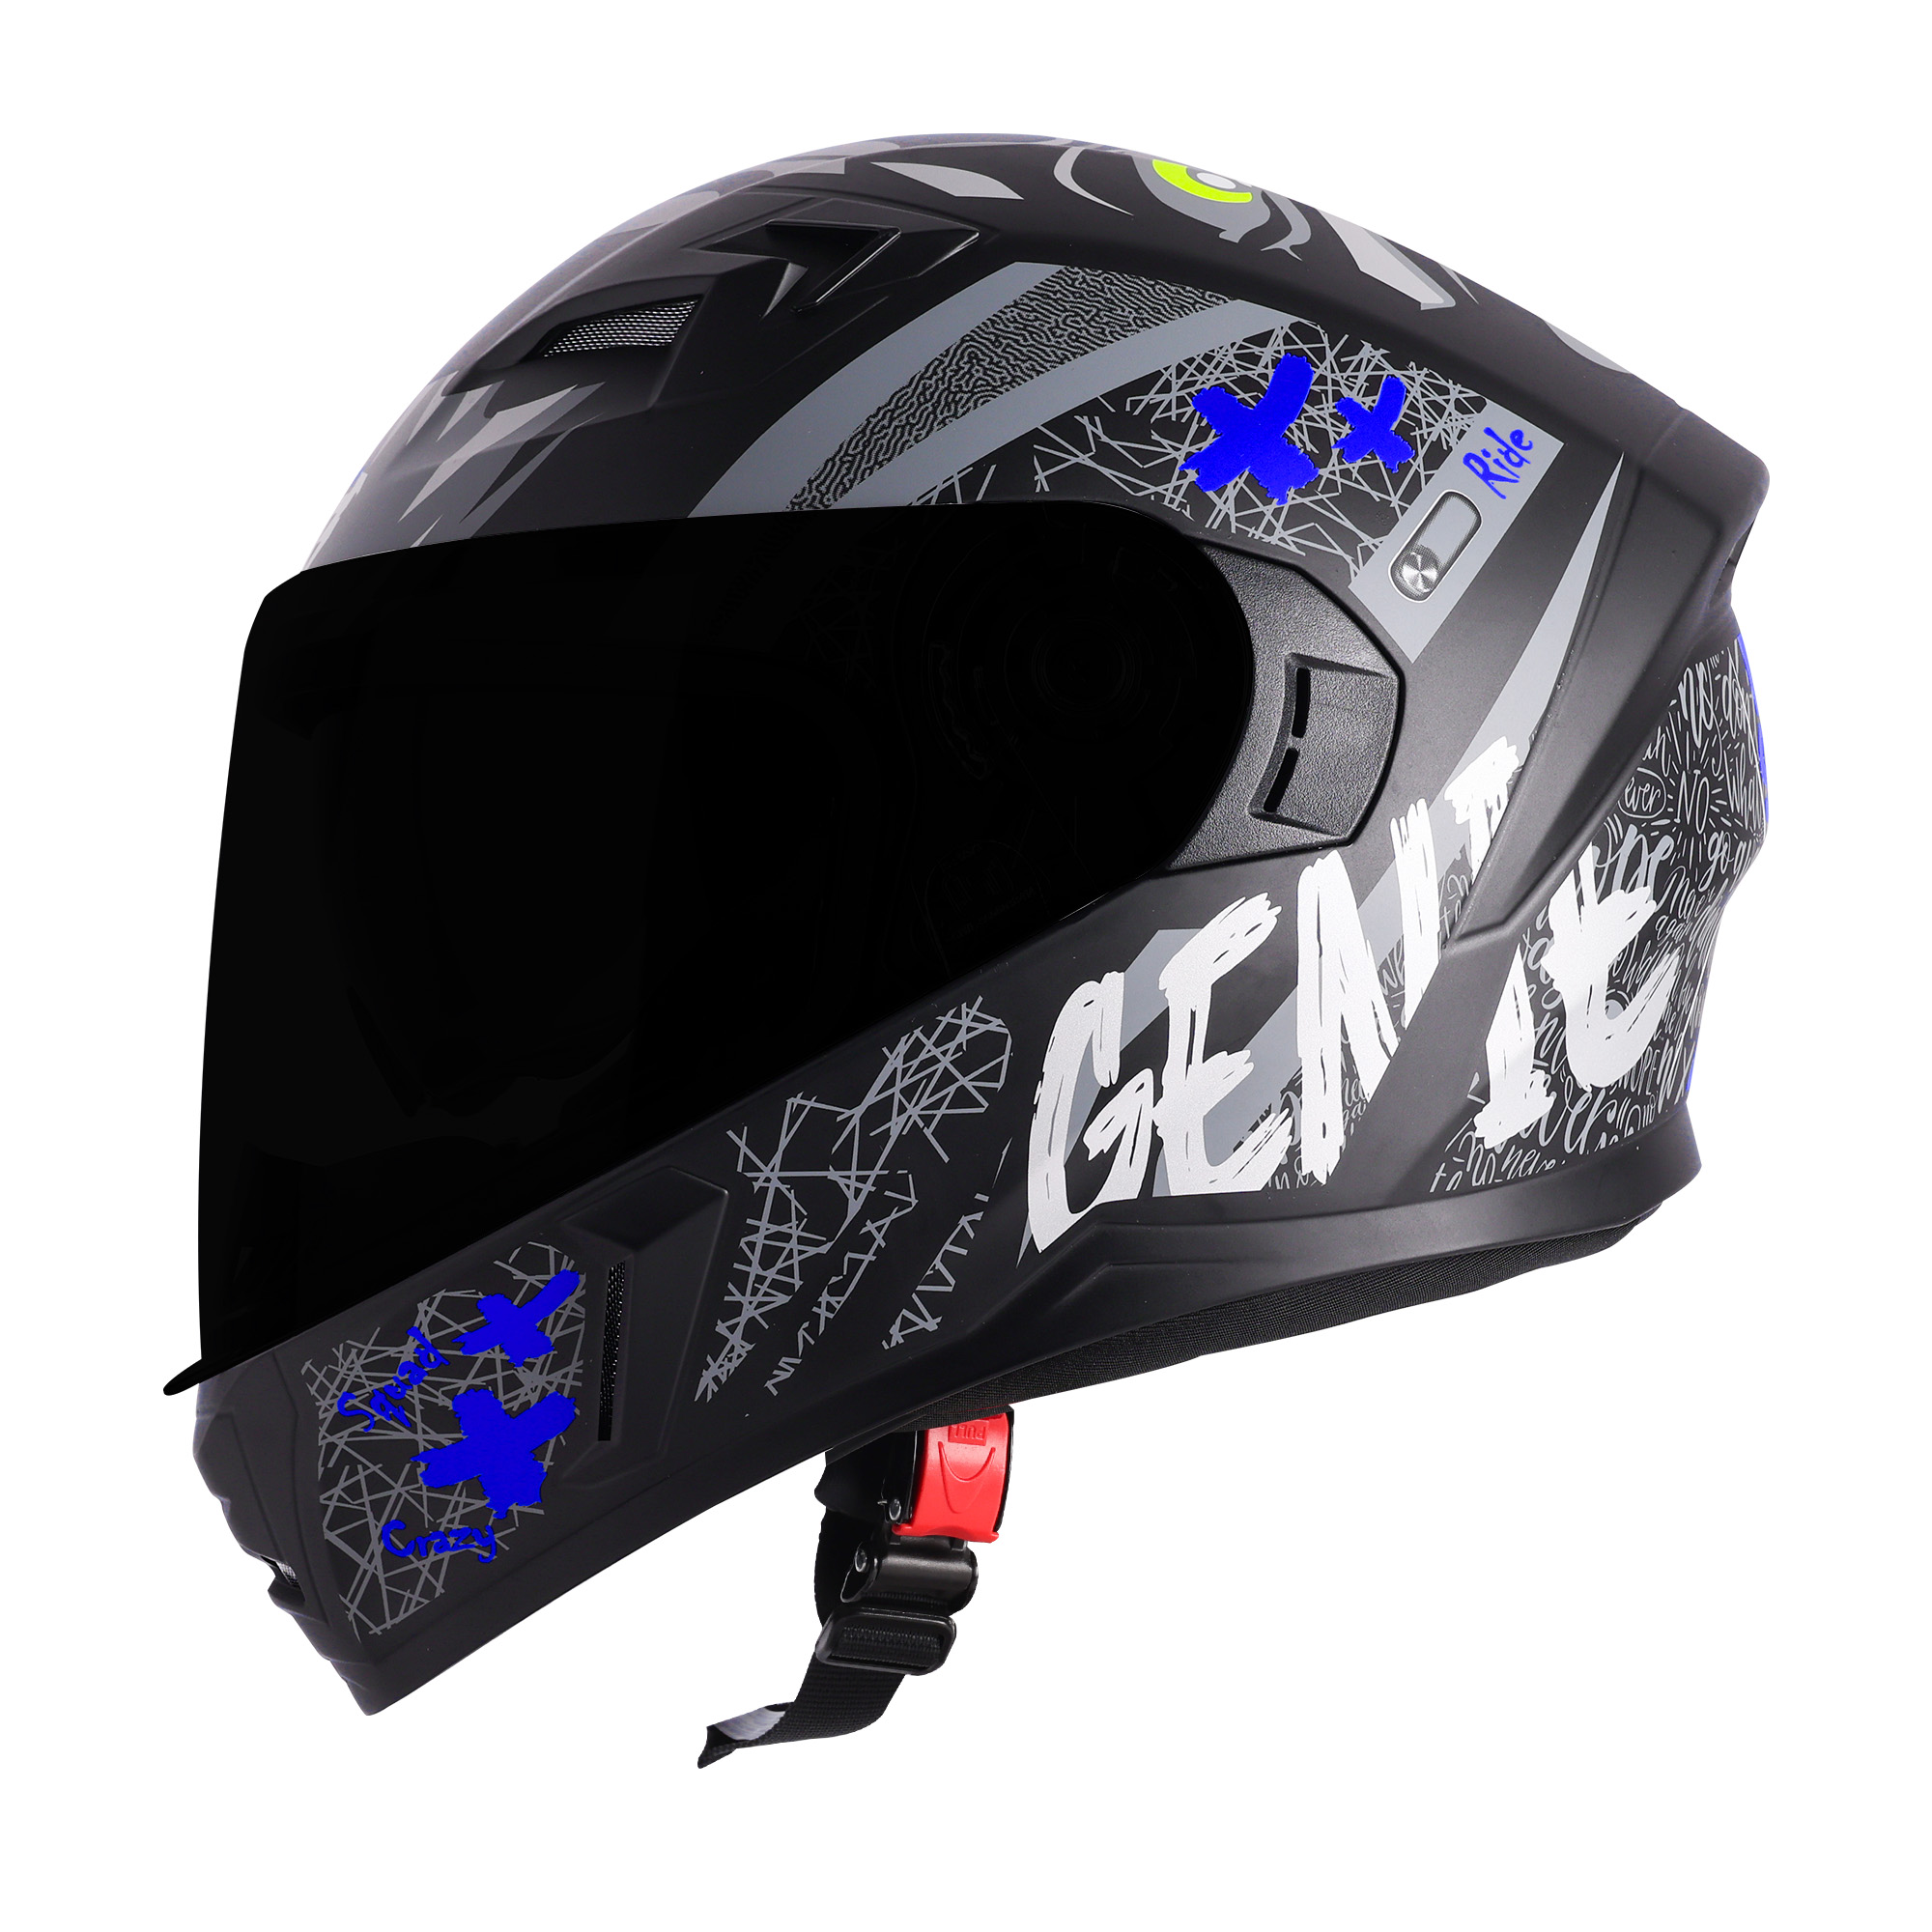 Steelbird SBA-21 Genie ISI Certified Full Face Graphic Helmet for Men and Women (Glossy Black Blue with Smoke Visor)